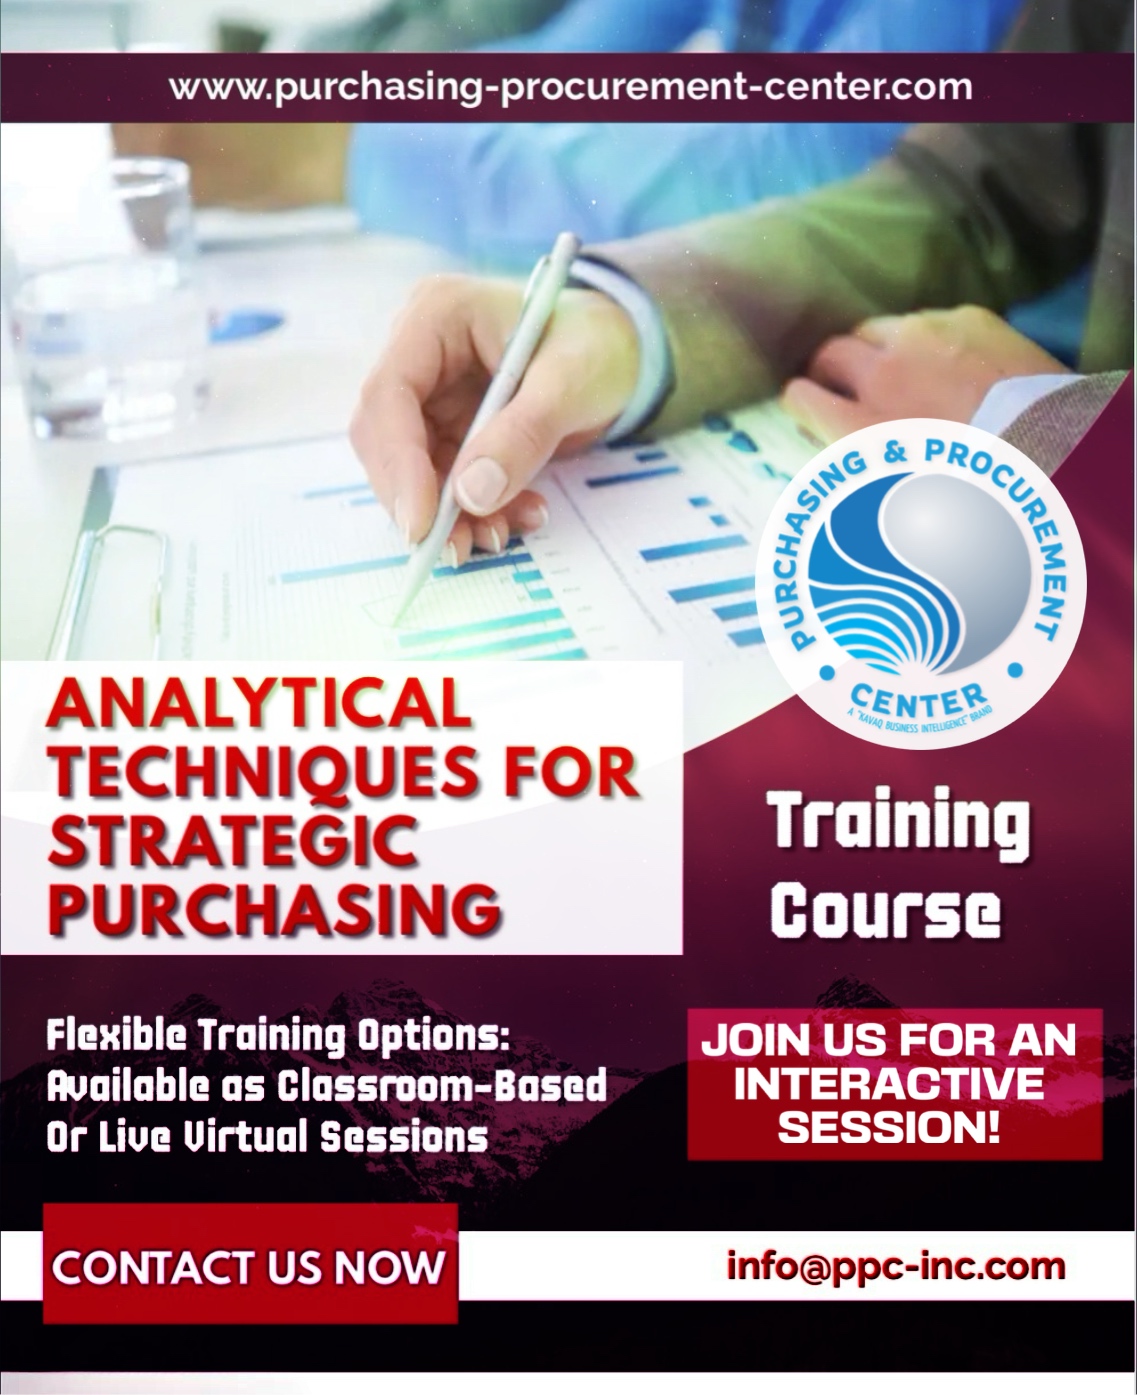 The Essential Analytical Techniques for Strategic Purchasing in the New Normal Program Covers Many of the Basic Analytics that Purchasing & Contract Personnel Use to Obtain Maximum Value for their Organizations.